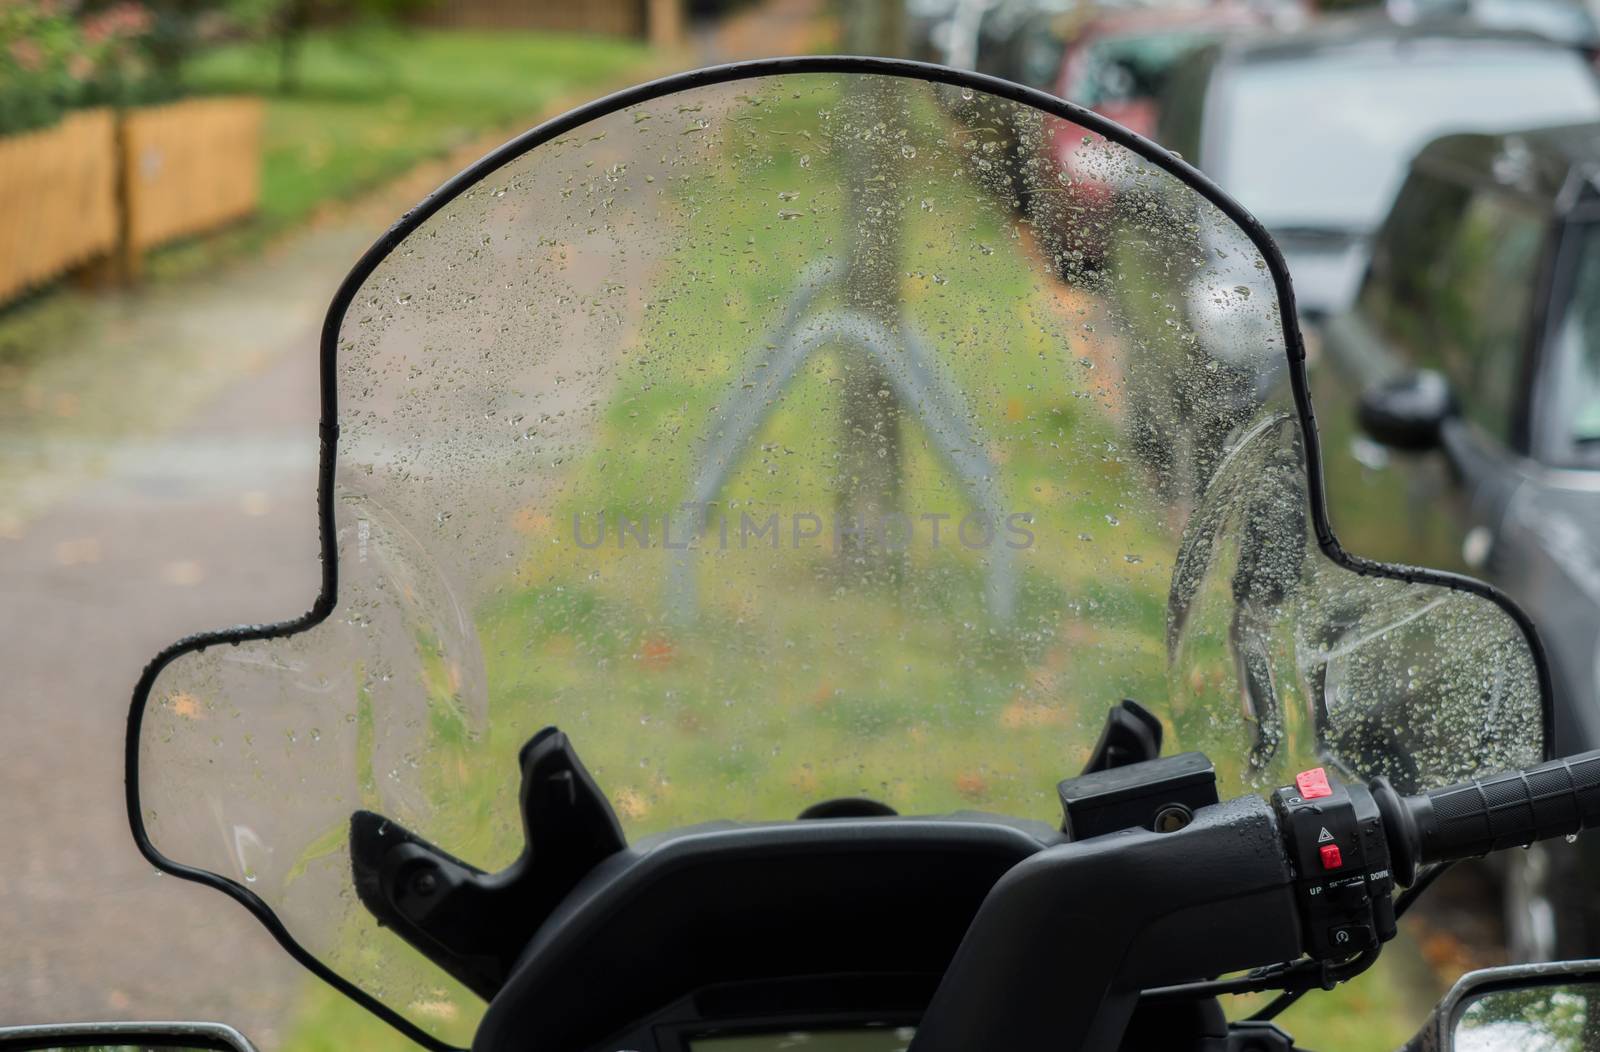 Wet windshield of a scooter